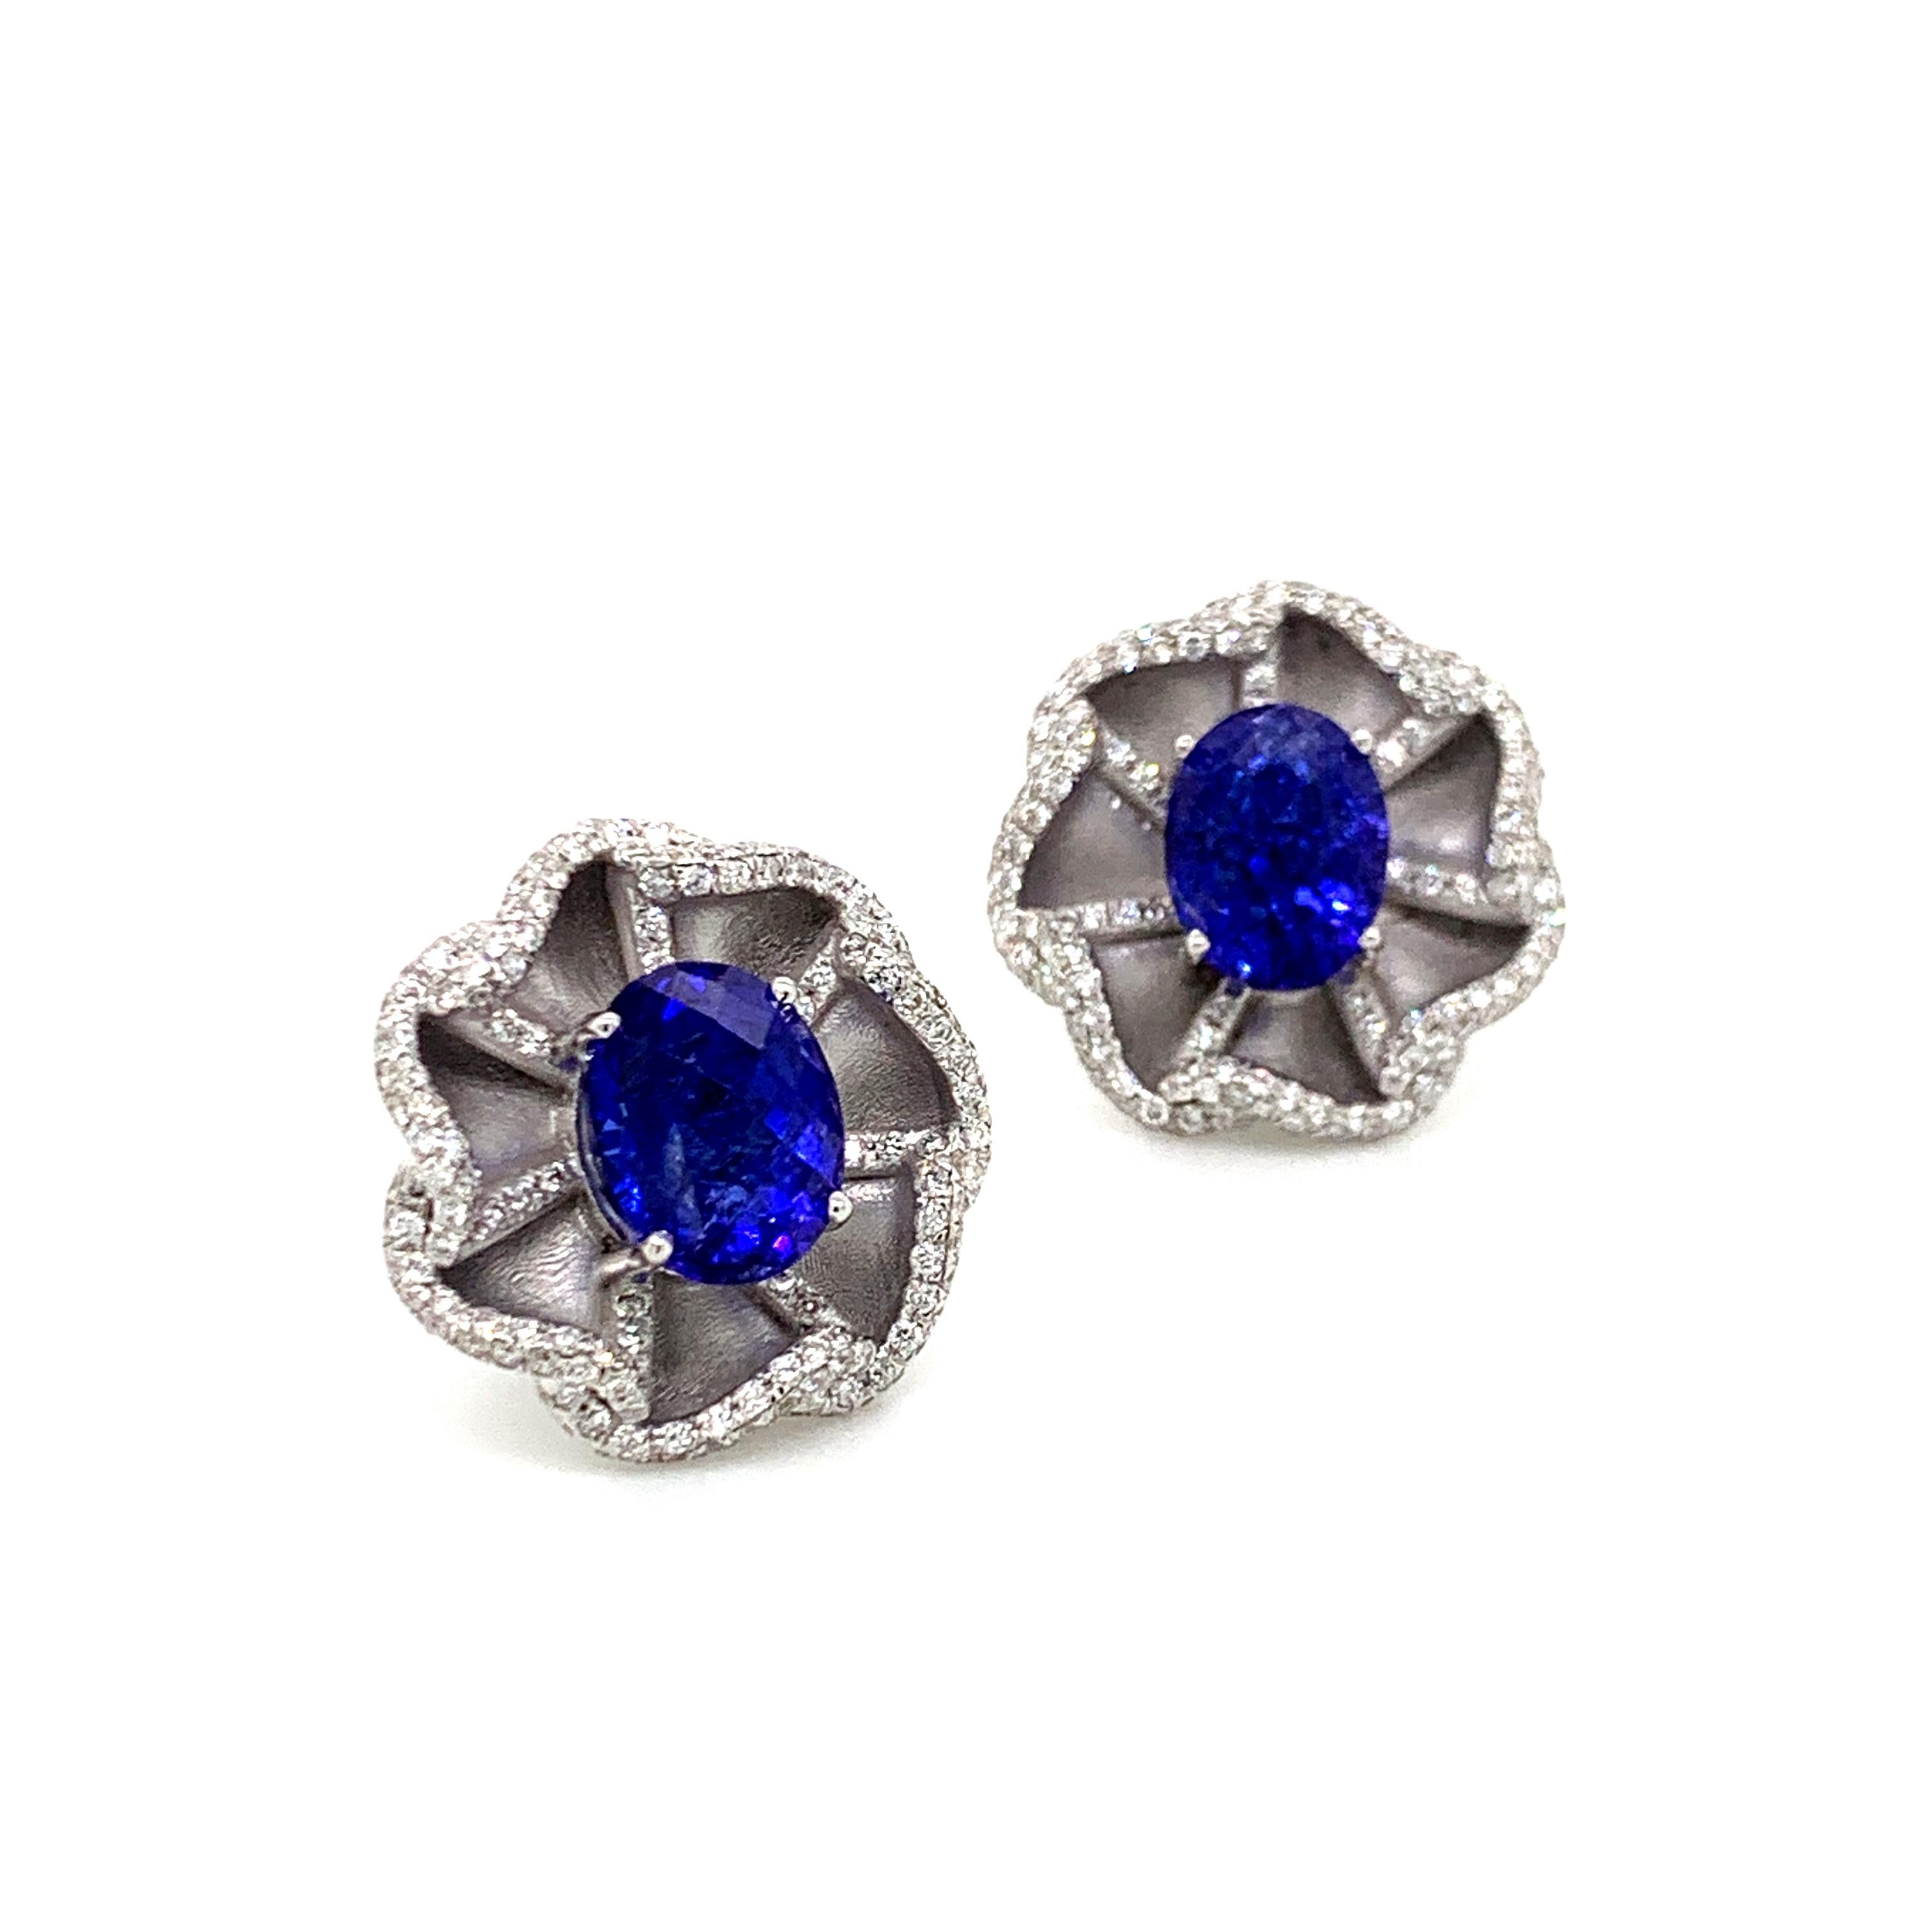 These beautiful diamond stud earrings with deep blue tanzanite ovals are set in textured 18 karat white gold. An elegant and classic look.

•	Total Diamond Weight: 1.09 carats
•	Tanzanite Weight: 5.97 carats
•	Diamond Quality/Colour: VS/FG (Clean,